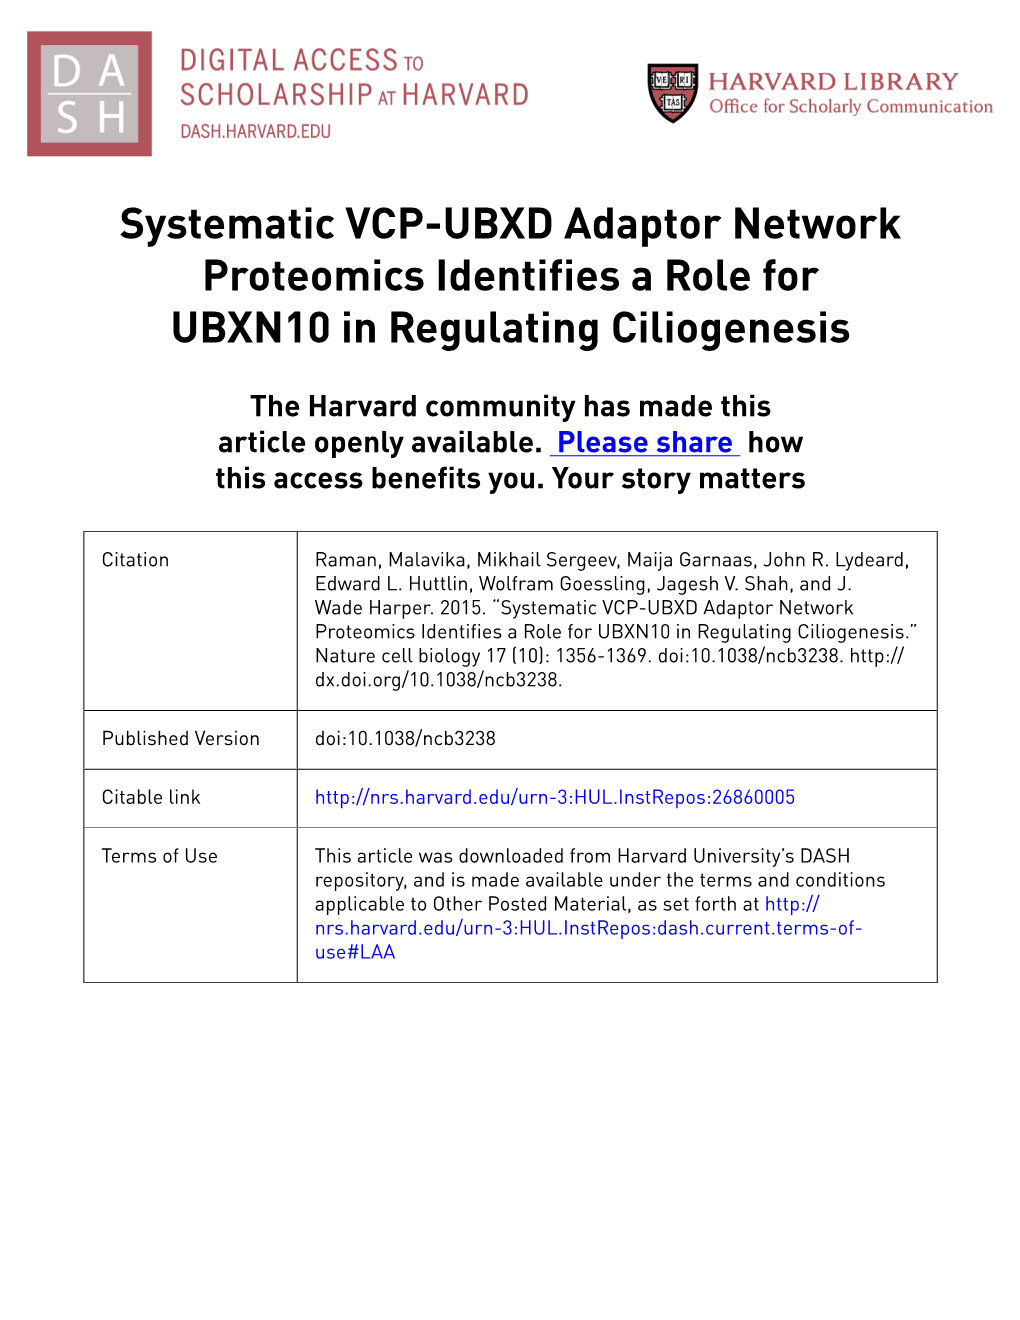 Systematic VCP-UBXD Adaptor Network Proteomics Identifies a Role for UBXN10 in Regulating Ciliogenesis